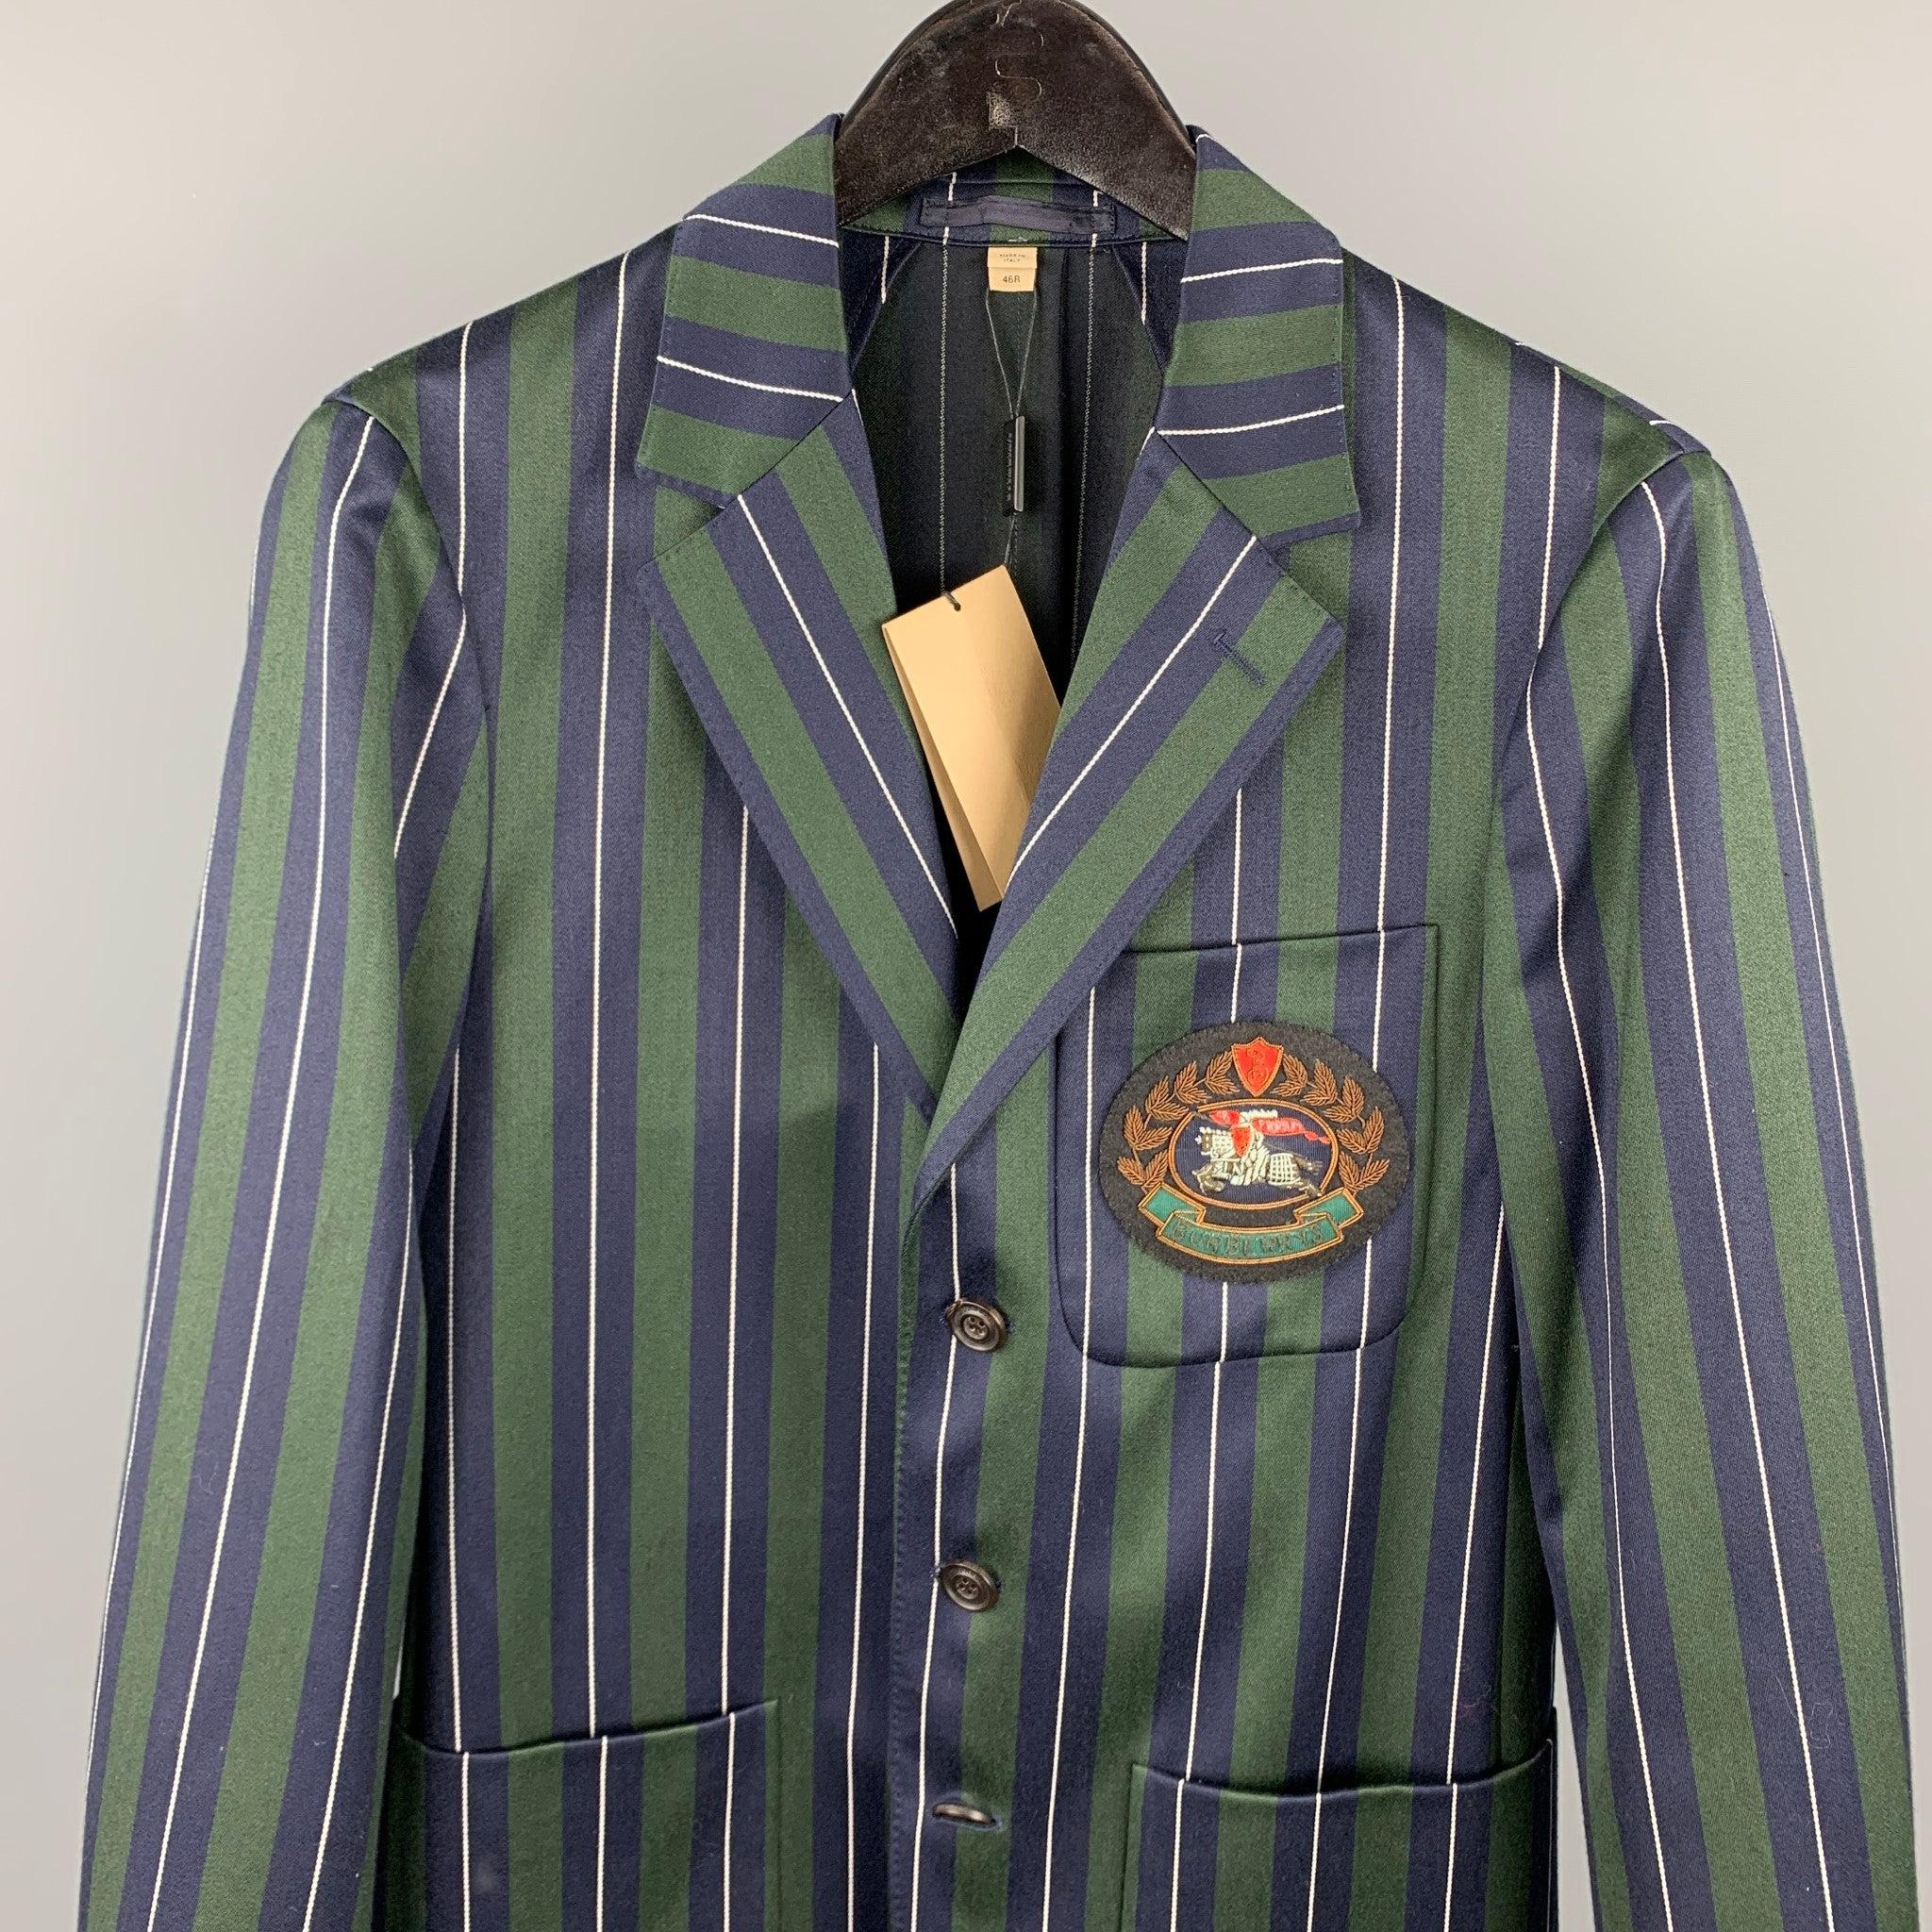 BURBERRY
suit comes in a green & navy vertical stripe wool / cotton with a half liner and front embroidered patch featuring a single breasted, three button sport coat with a notch lapel and matching flat front trousers. Made in Italy. New With Tags.